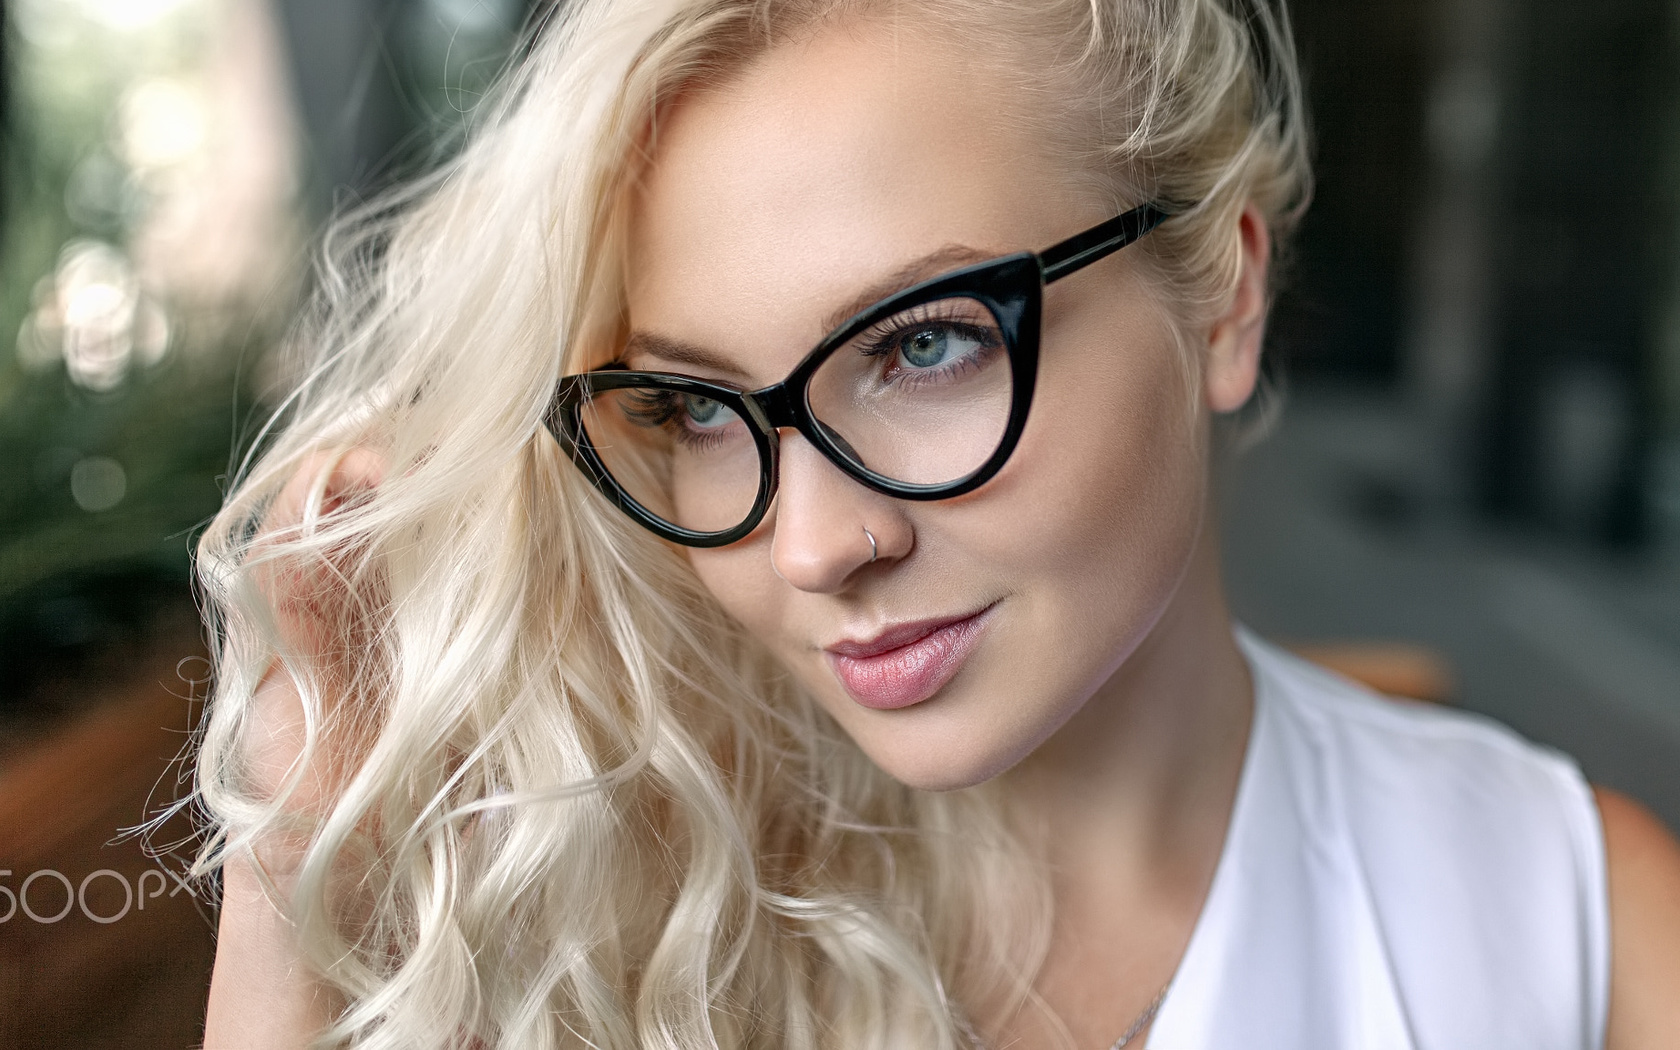 women, blonde, looking away, nose rings, bokeh, women with glasses, 500px